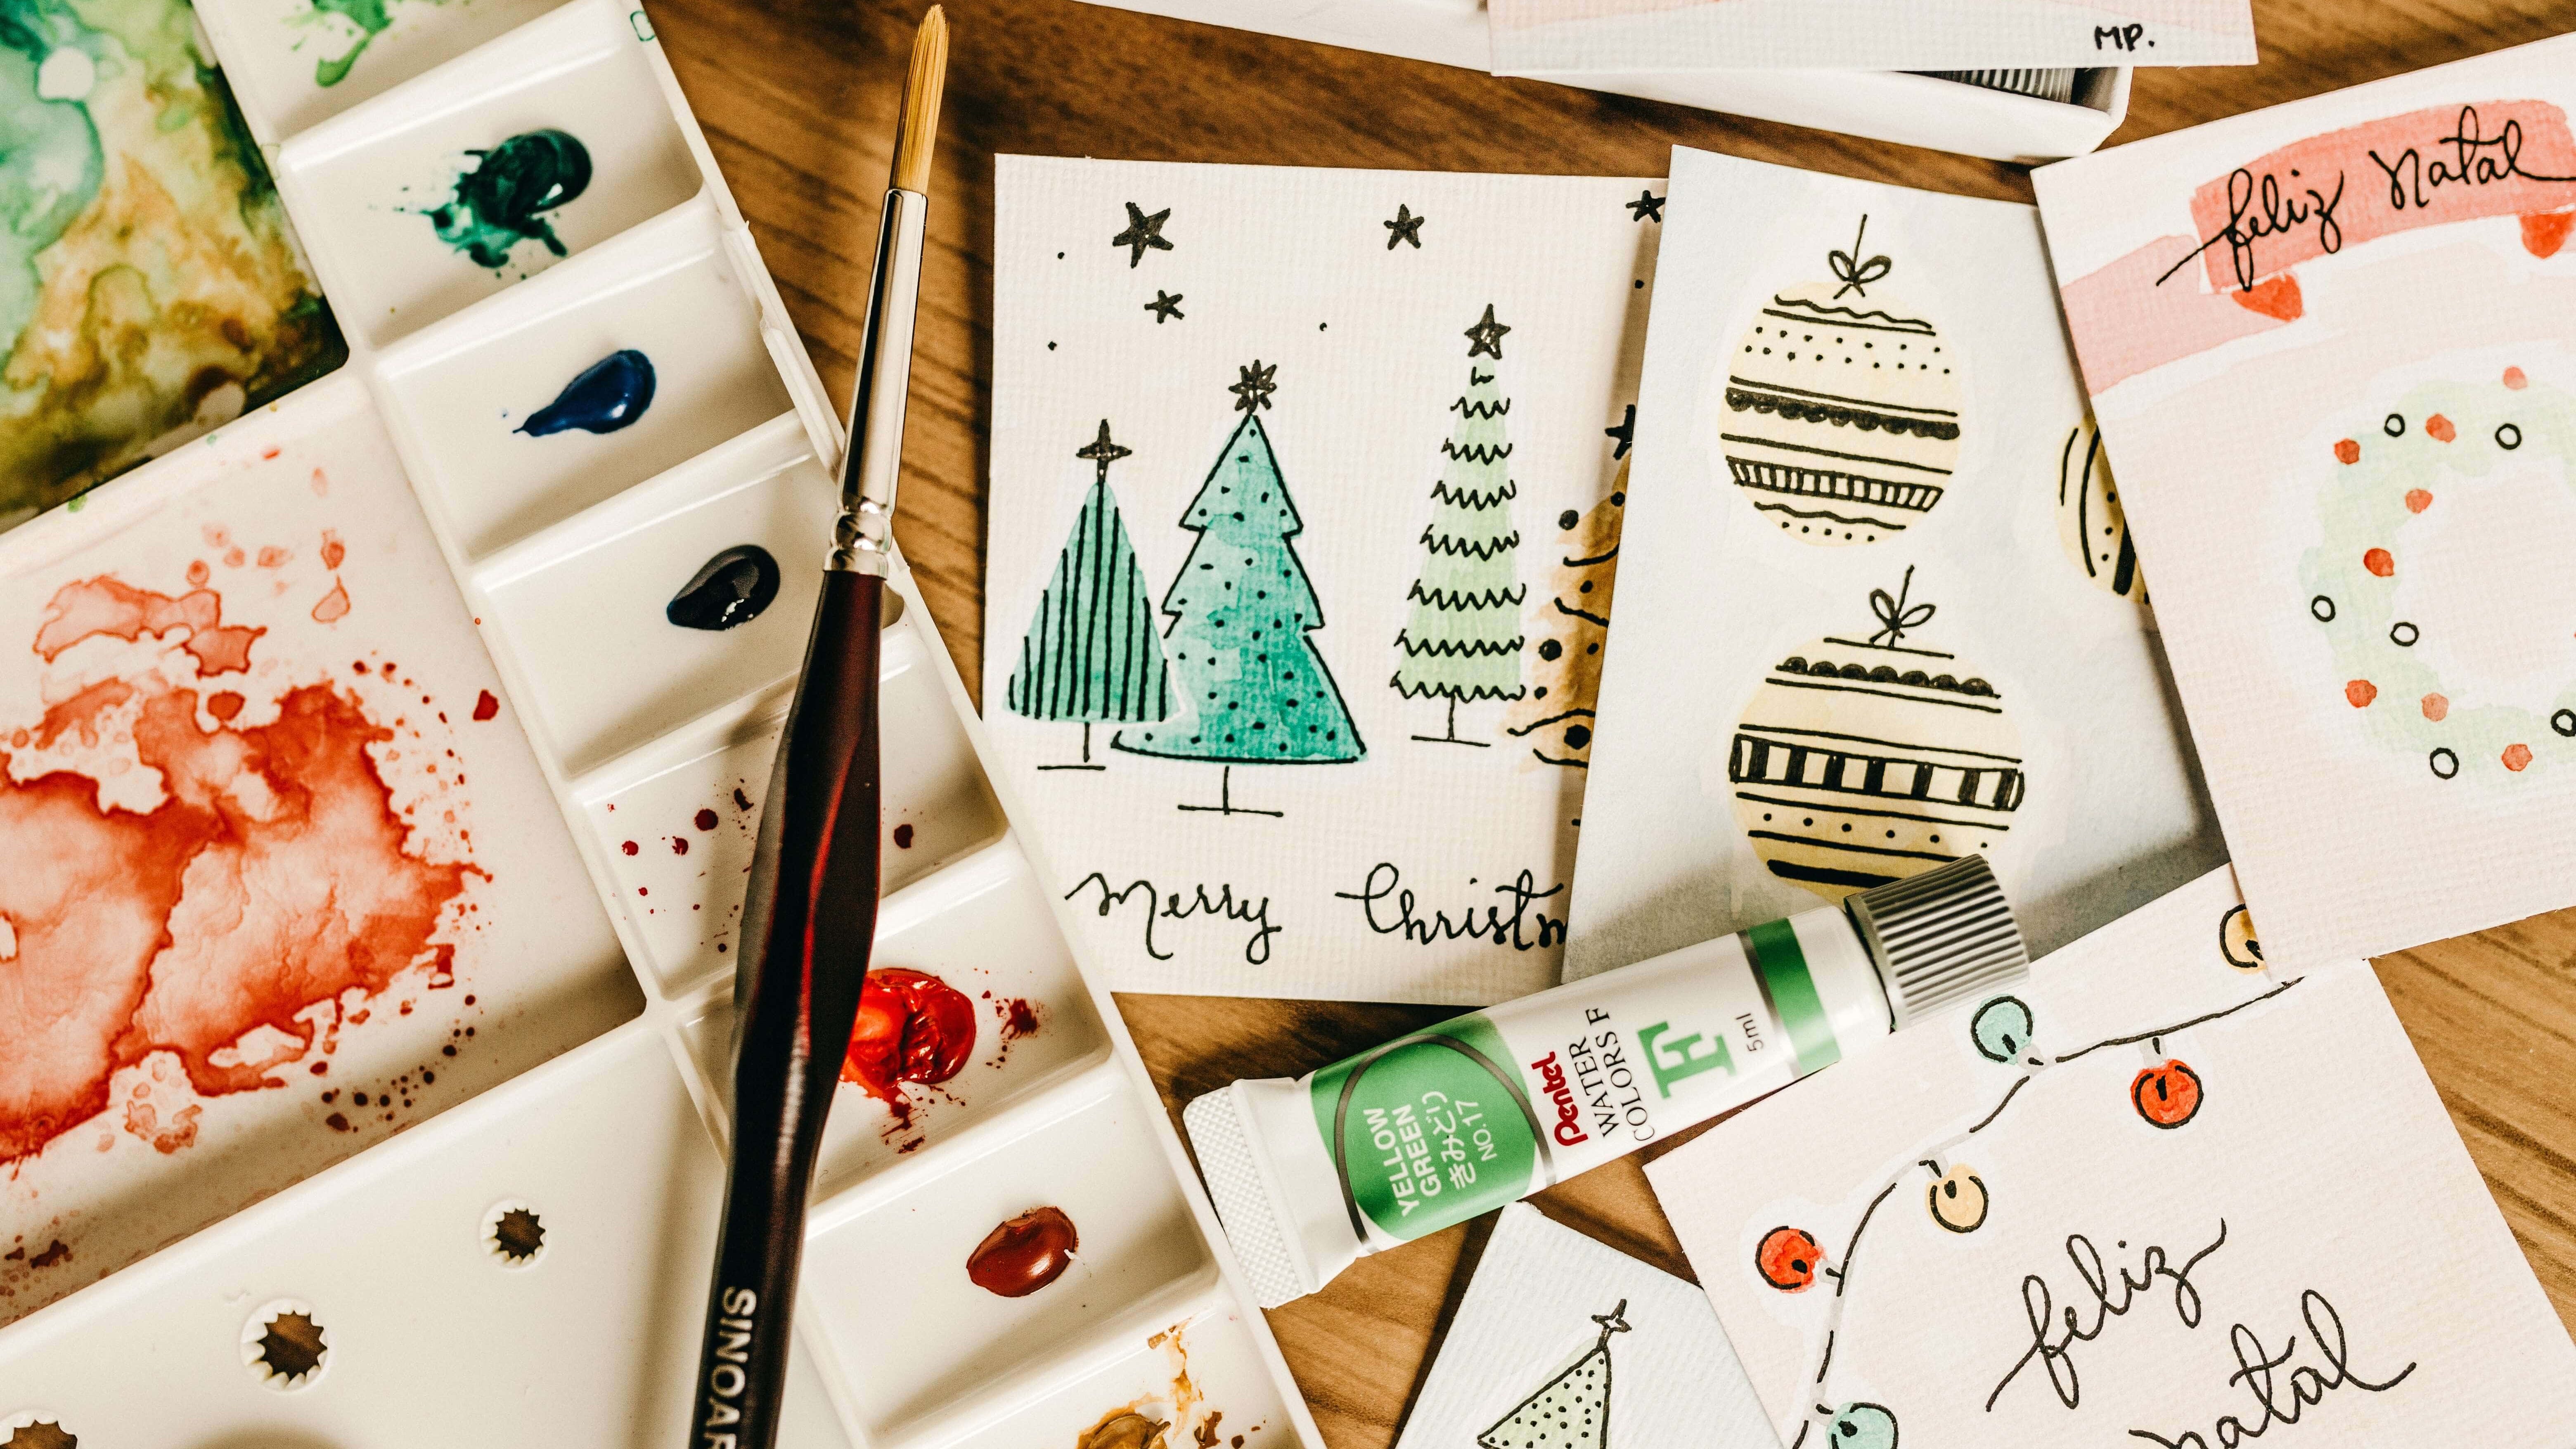 Holiday cards and paints on the table